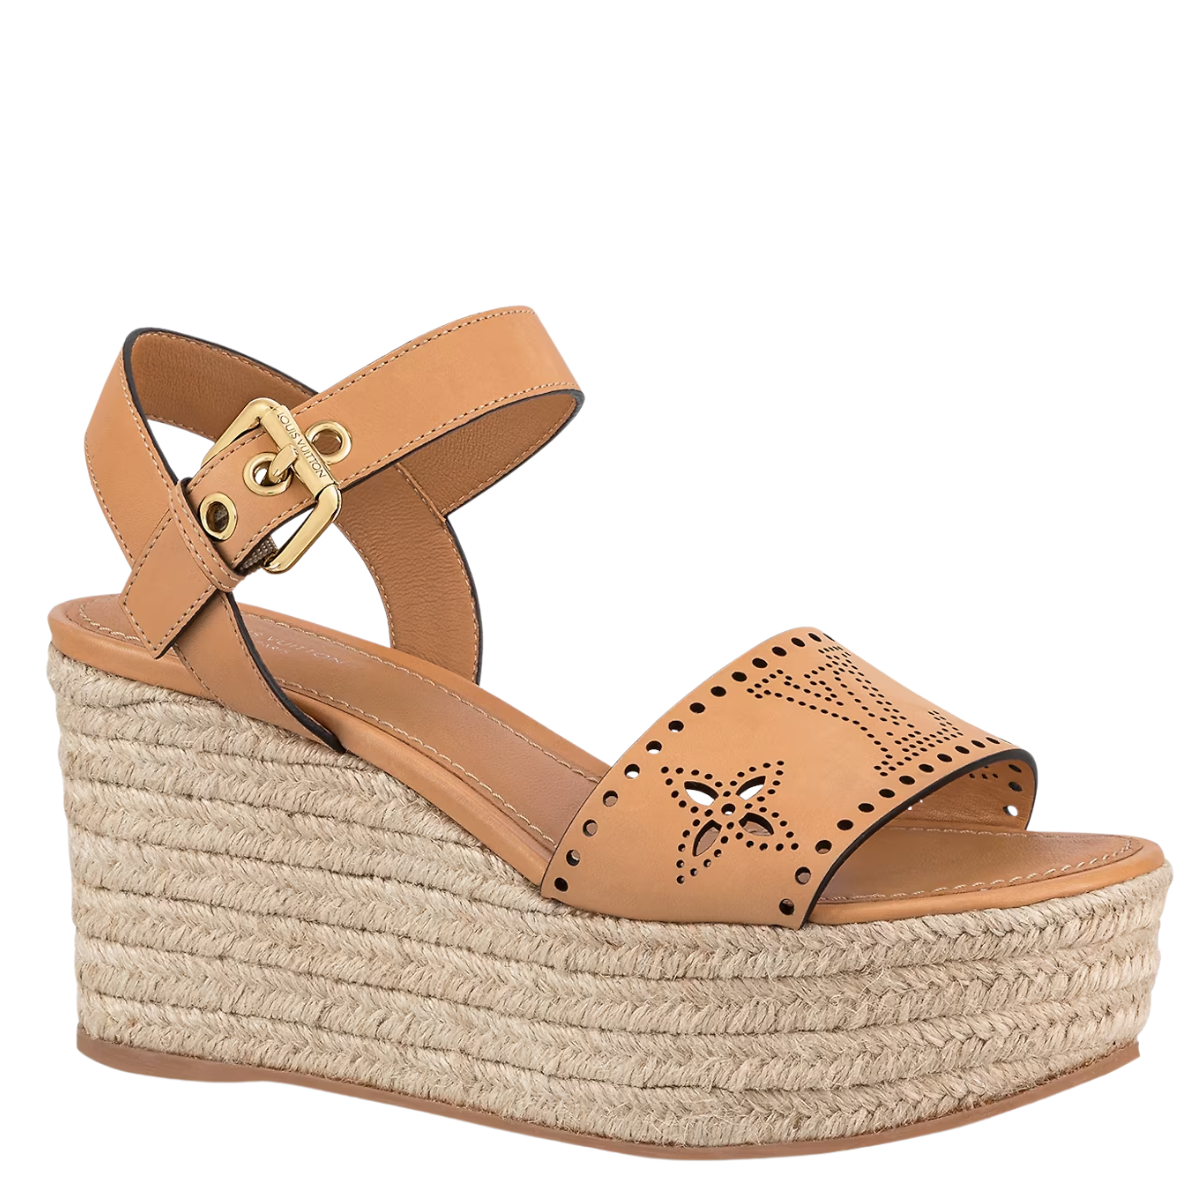 12 Best Wedge Sandals To Shop This Spring — The Style Diary.